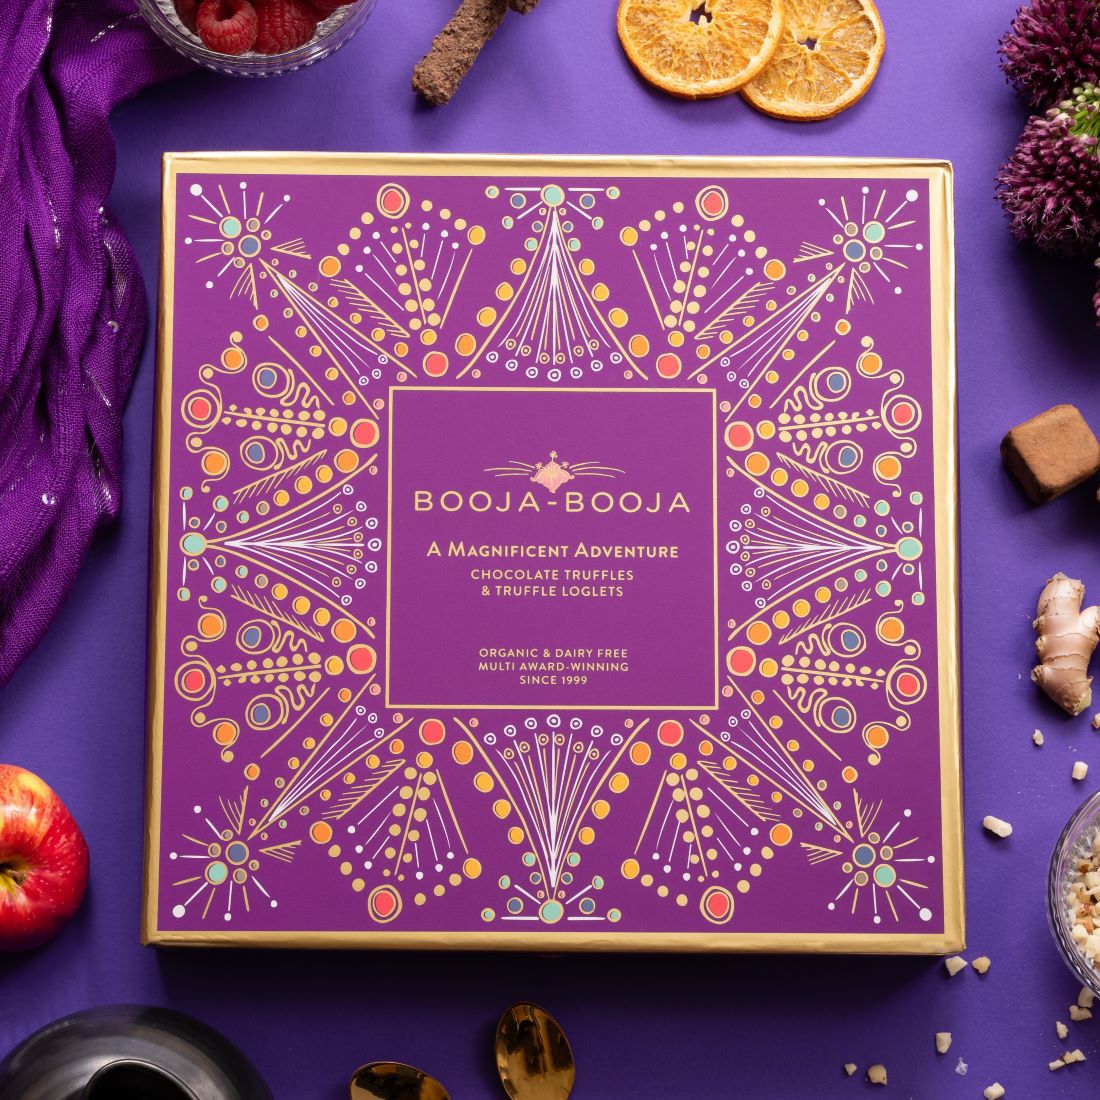 Chewy yumminess meets gently spiced fruitiness in our #new Gingered Toffee Apple truffle. Find these Chocolate Truffle Loglets in our selection boxes The Magnificent Adventure, The Grand Adventure and Gourmet Selections No. 1 & No. 2 #BoojaBooja #Vegan #Organic #OrganicSeptember